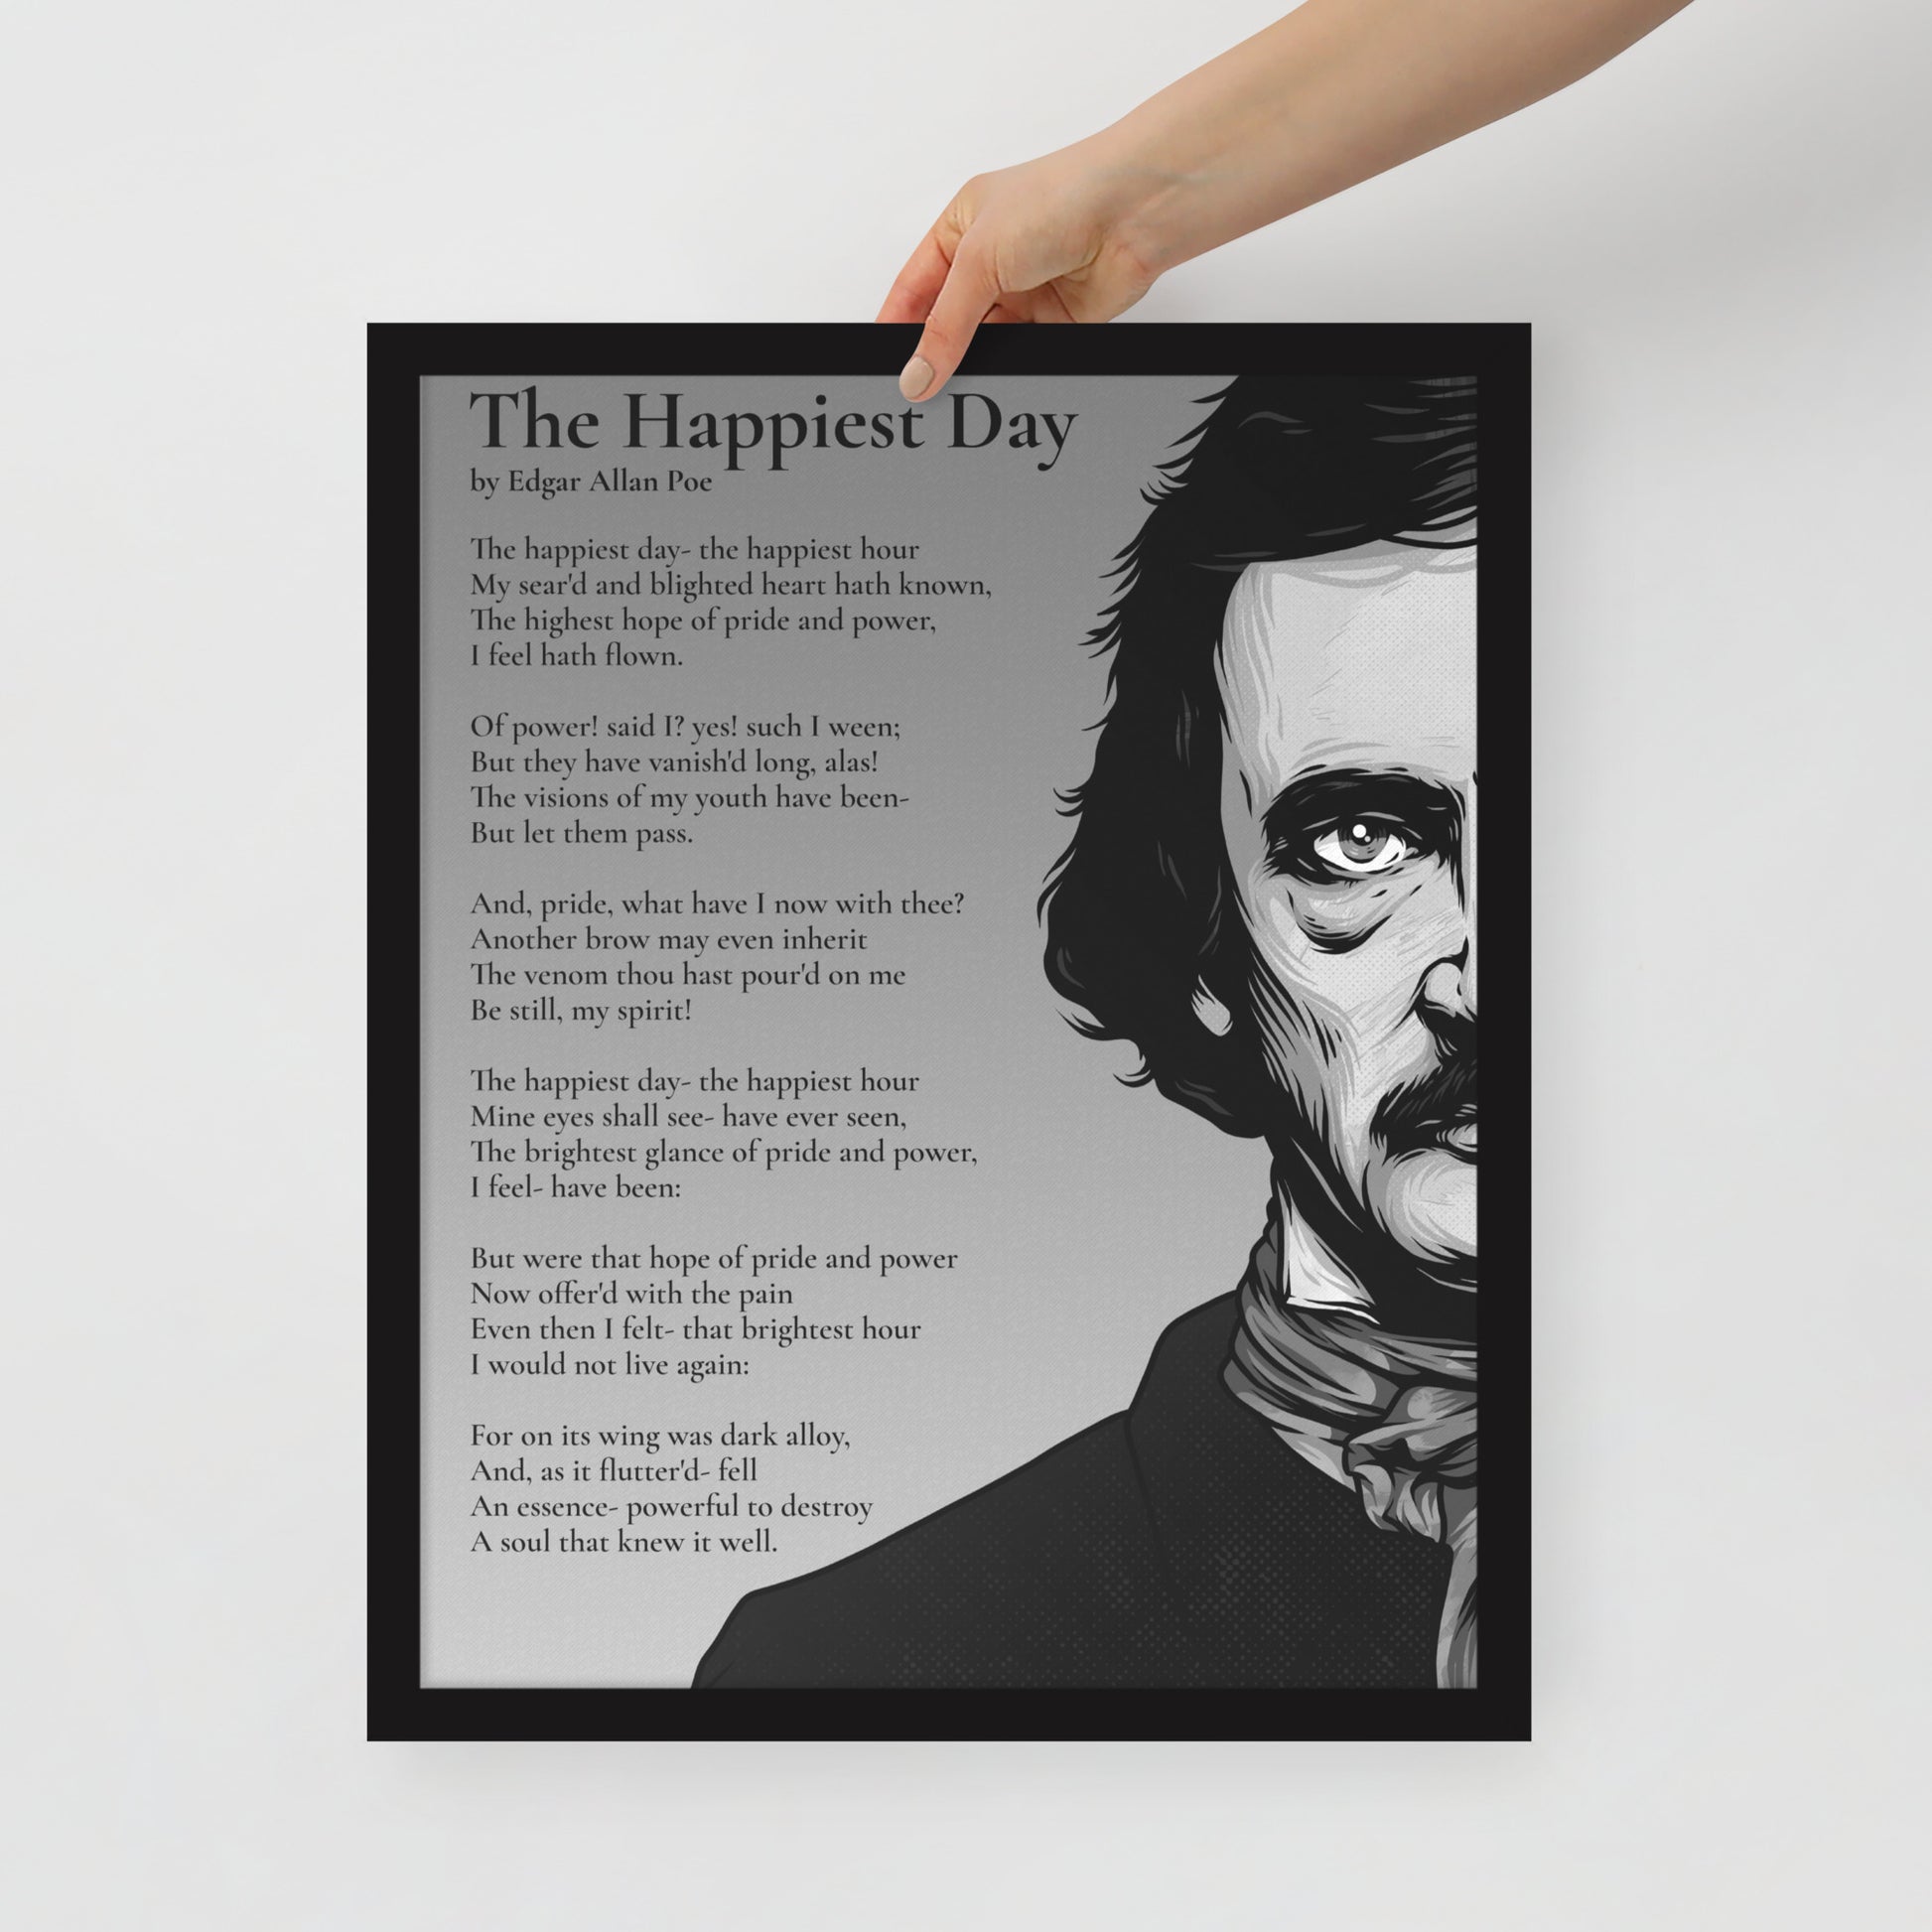 Edgar Allan Poe's 'The Happiest Day' Framed Matted Poster - 16 x 20 Black Frame